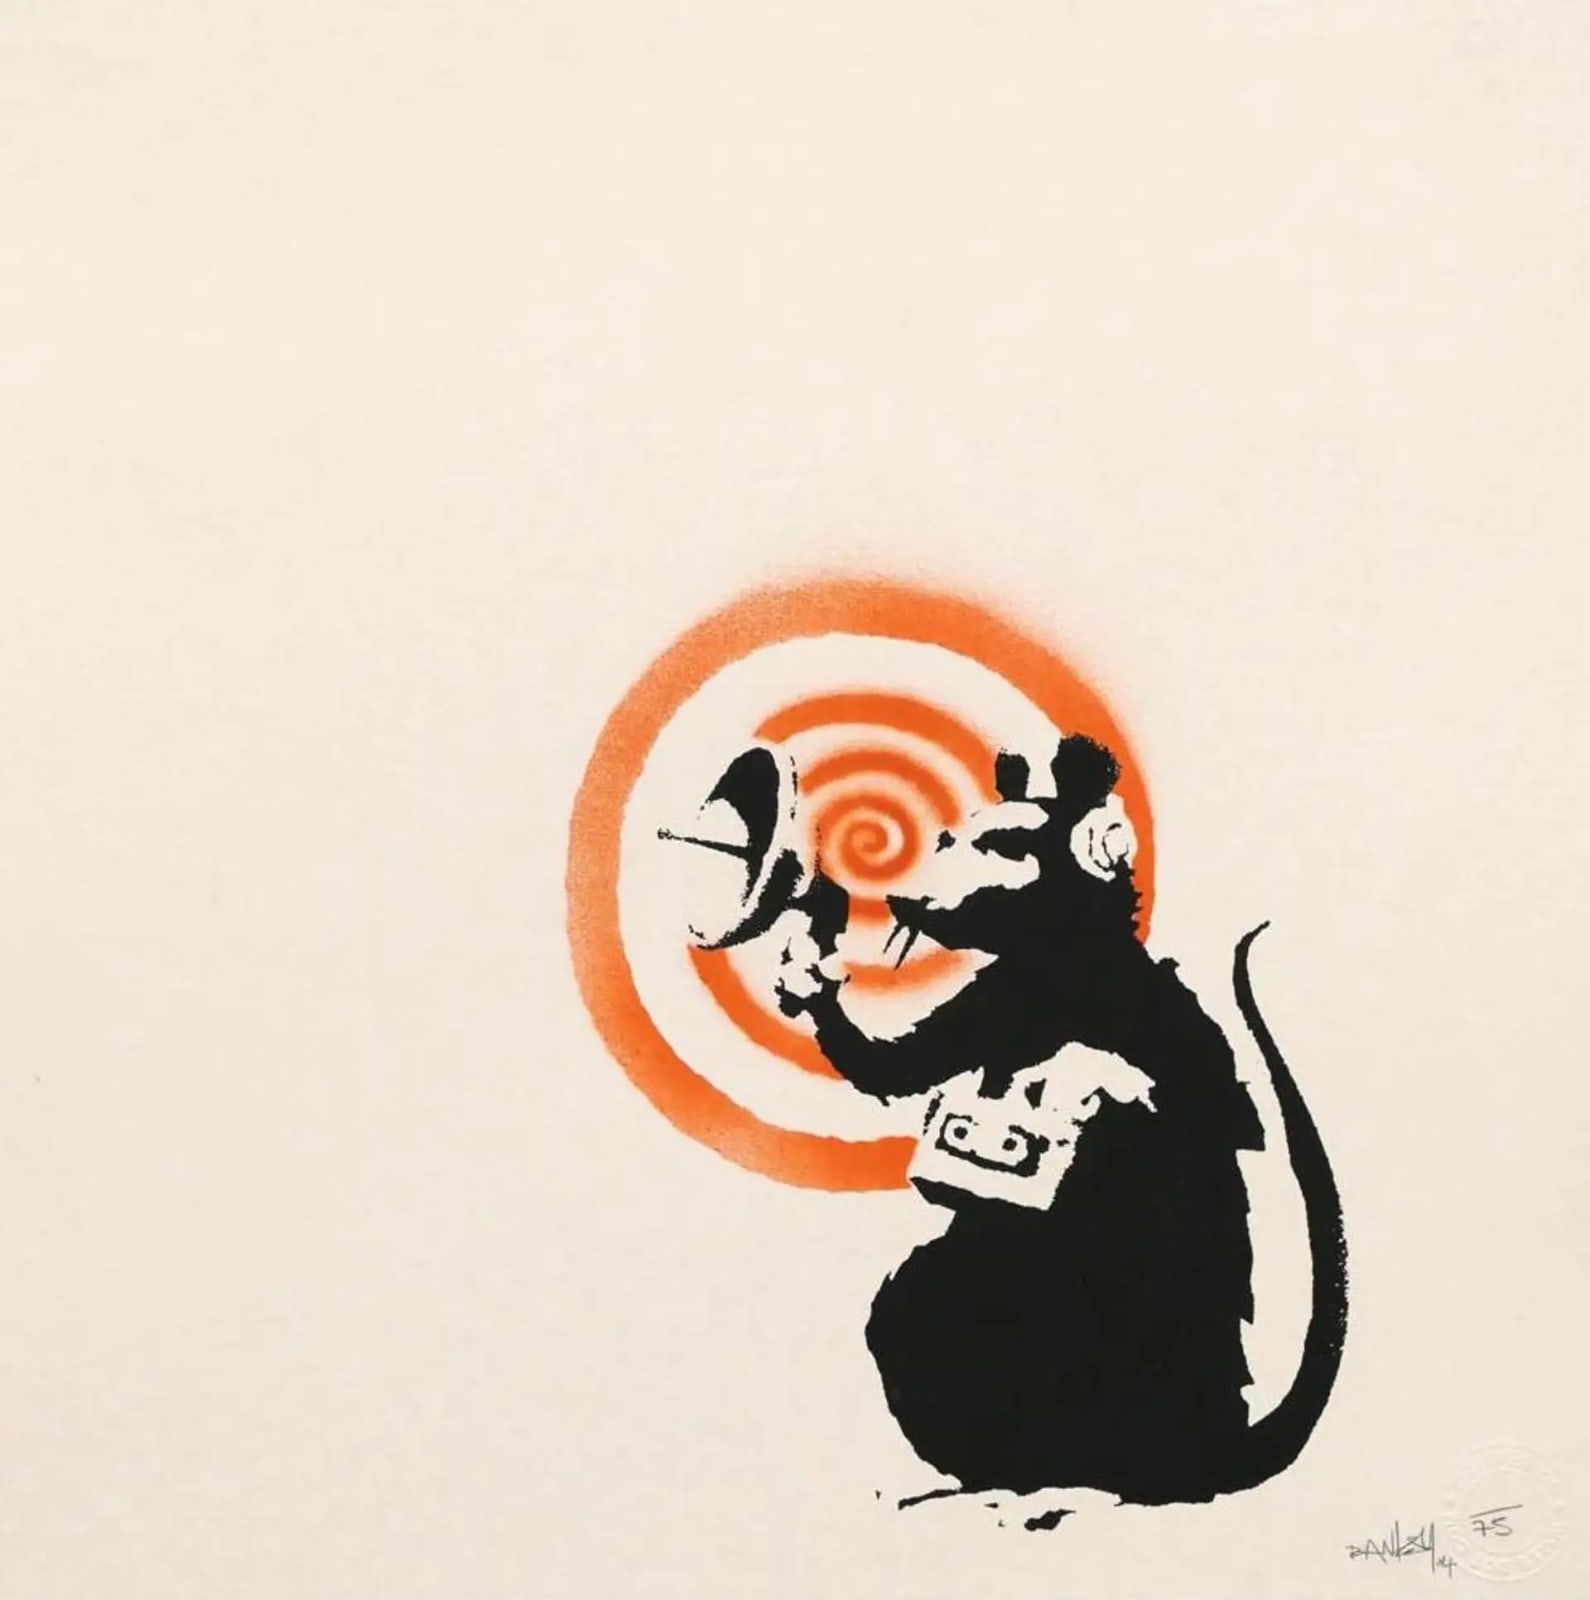 Our Time Will Come, Banksy Poster, Rat Series